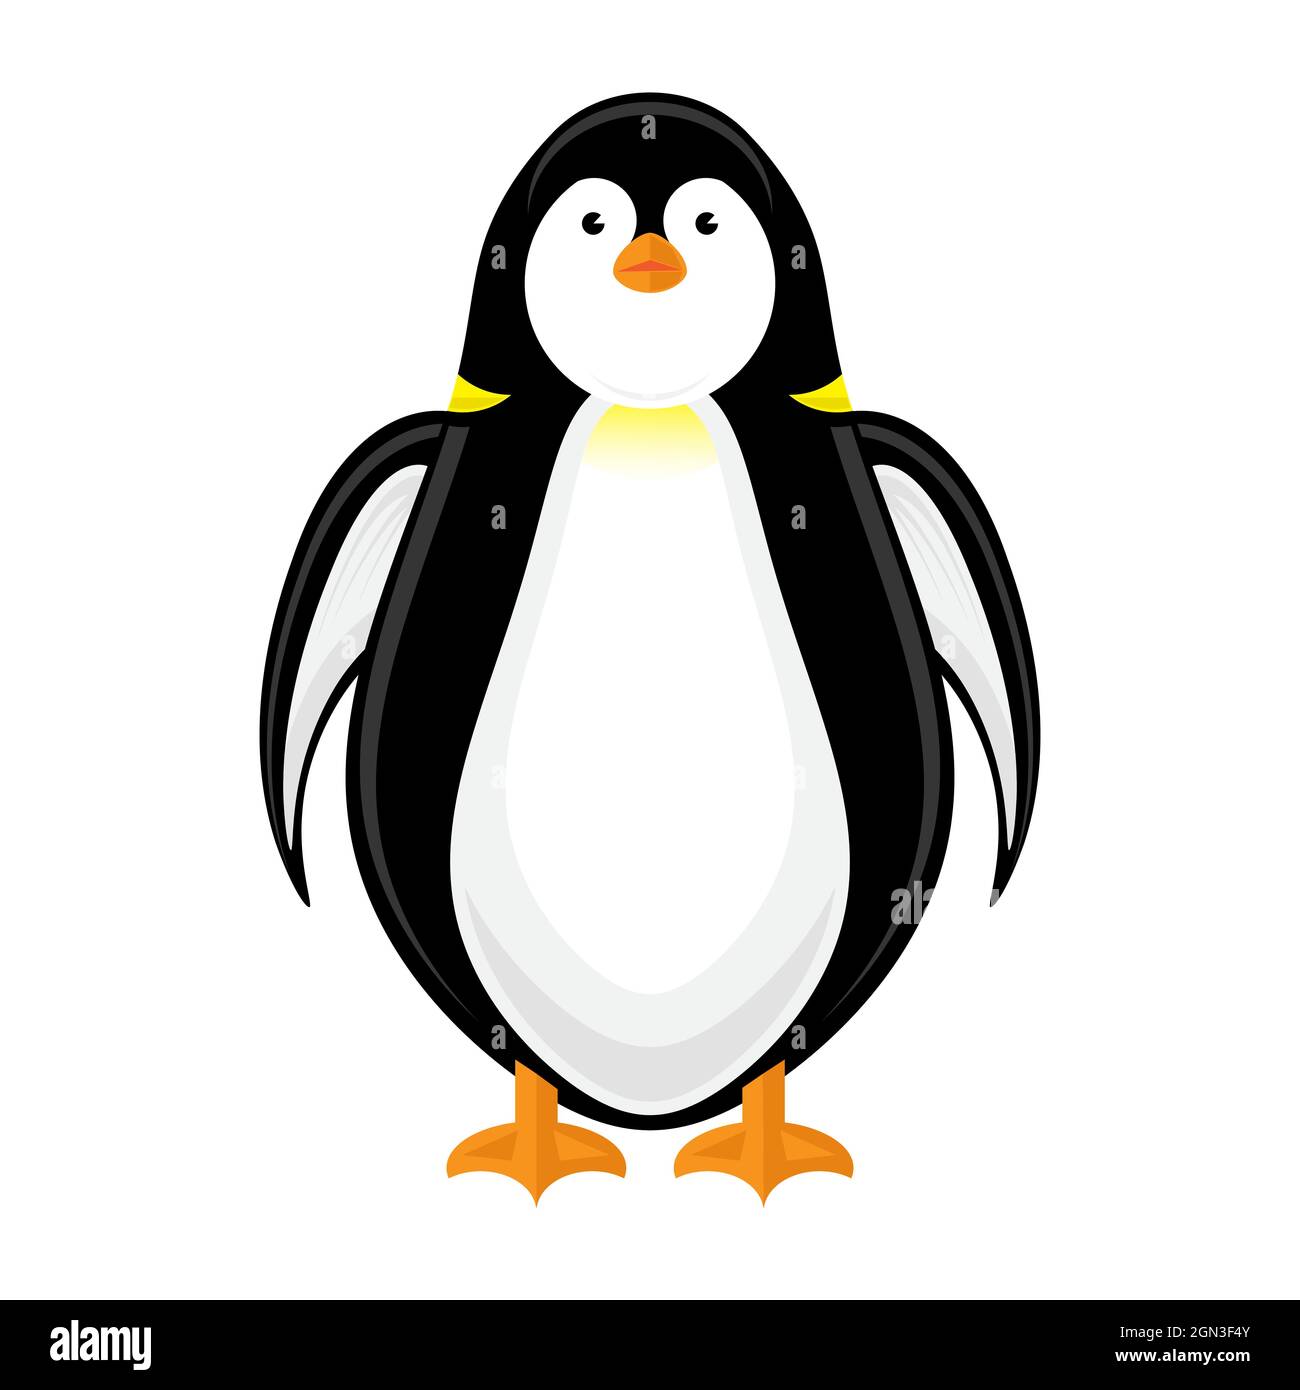 Cute Penguin Icon Isolated on White Background Stock Vector